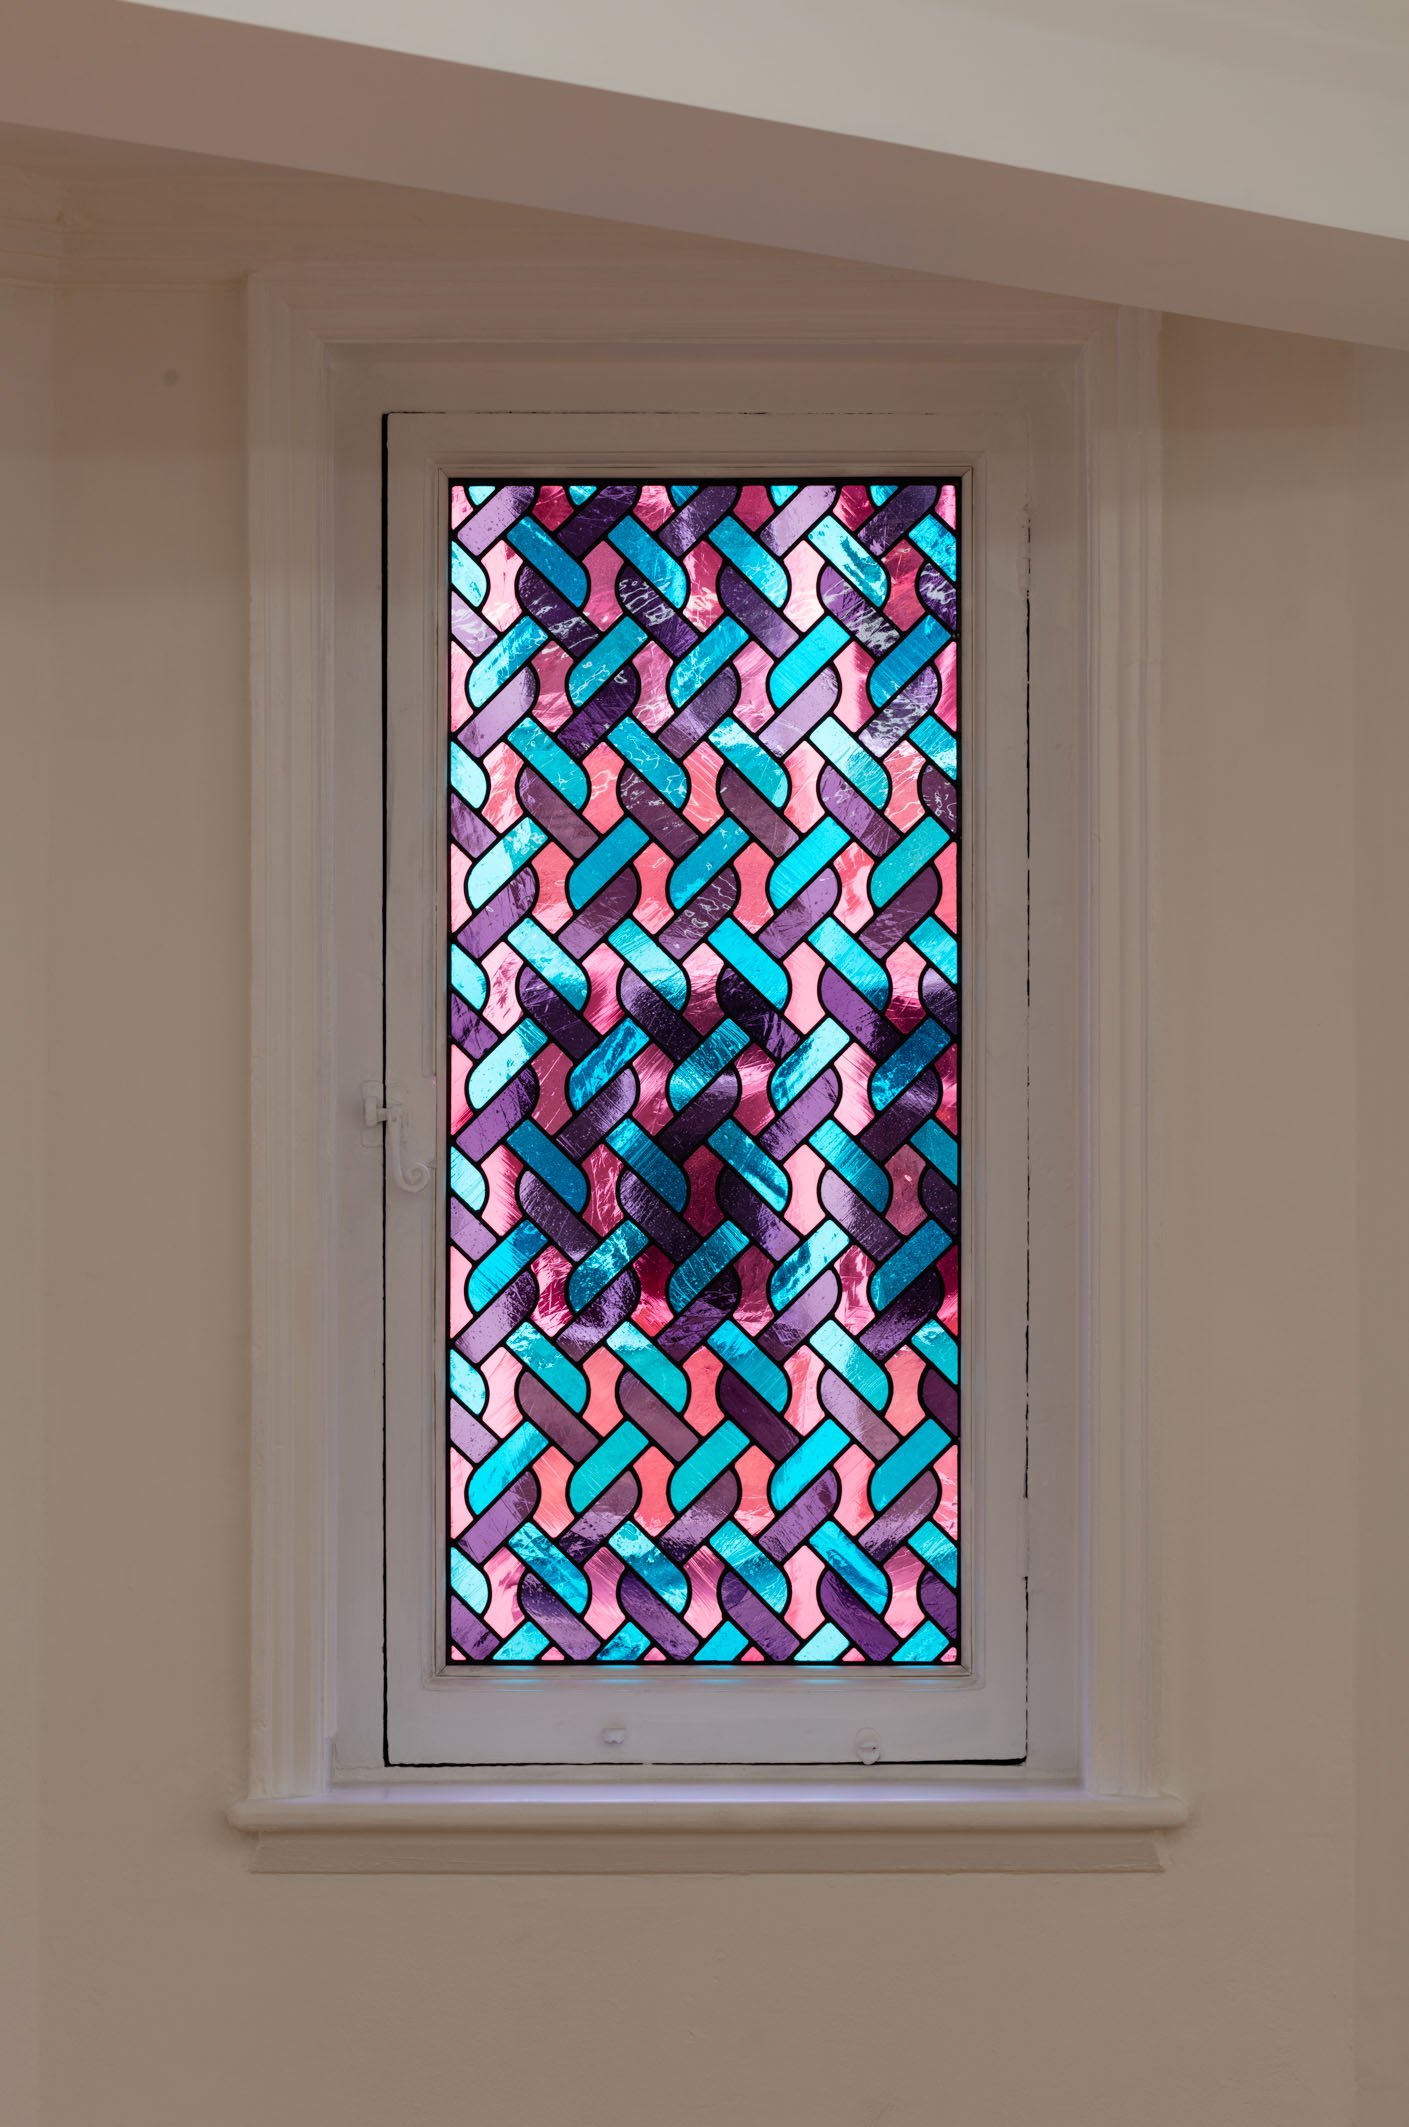 Christodoulos Panayiotou, Untitled, stained glass window, 122 x 52.5 cm, 2016